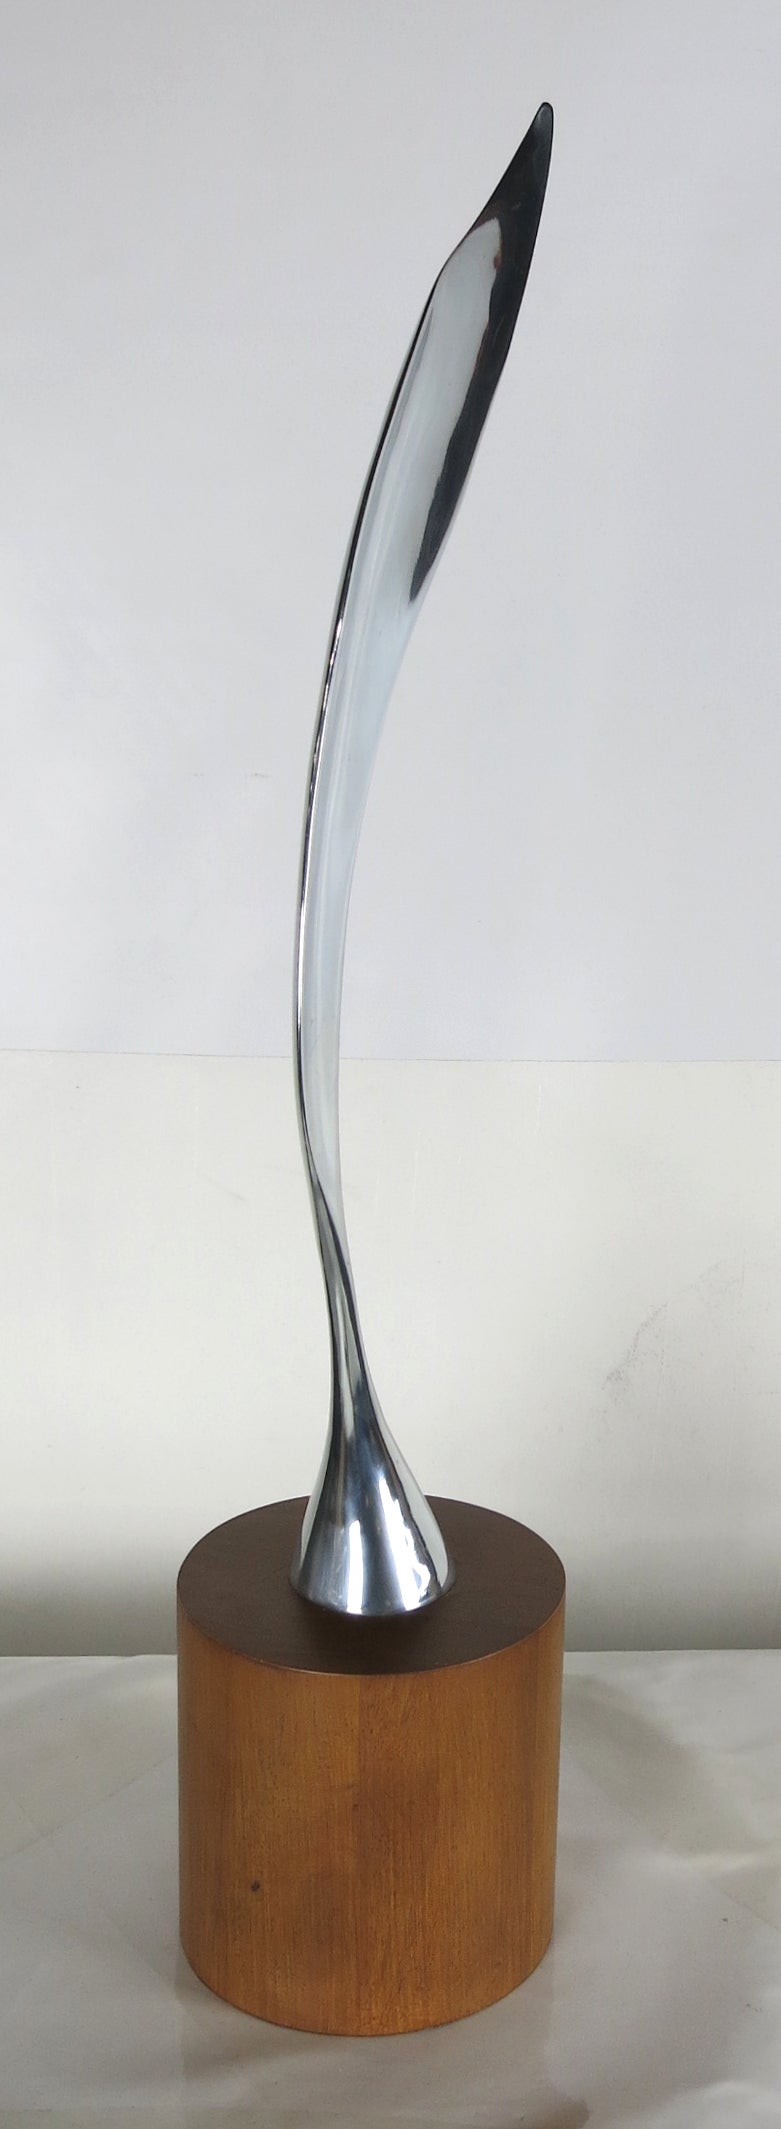 Polished aluminum feather sculpture mounted on a cylinder form walnut base in the manner of Brancusi.